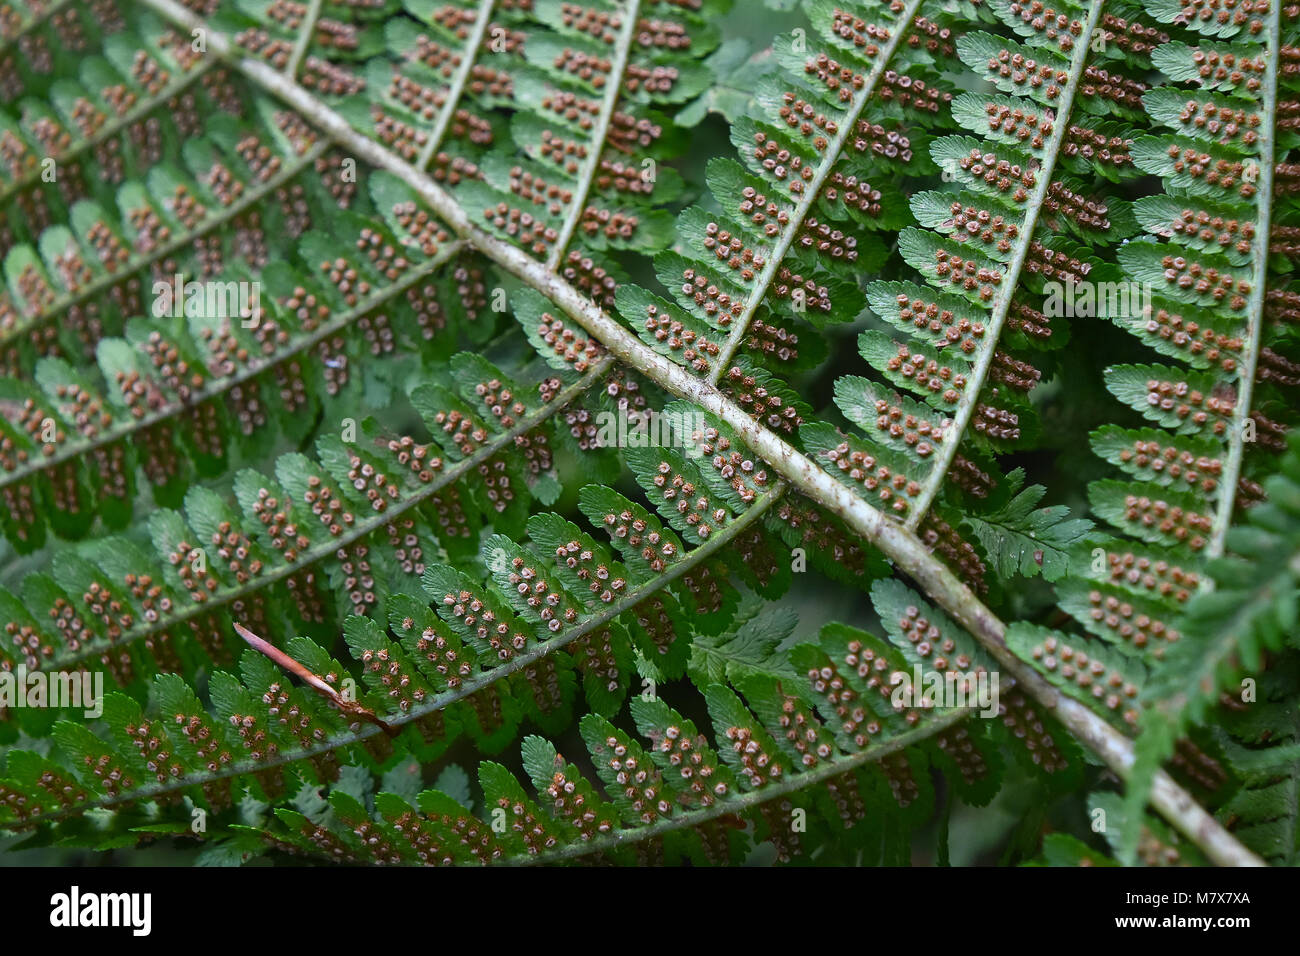 Extreme close up green fern leaves diagonal view, selective focus Stock Photo